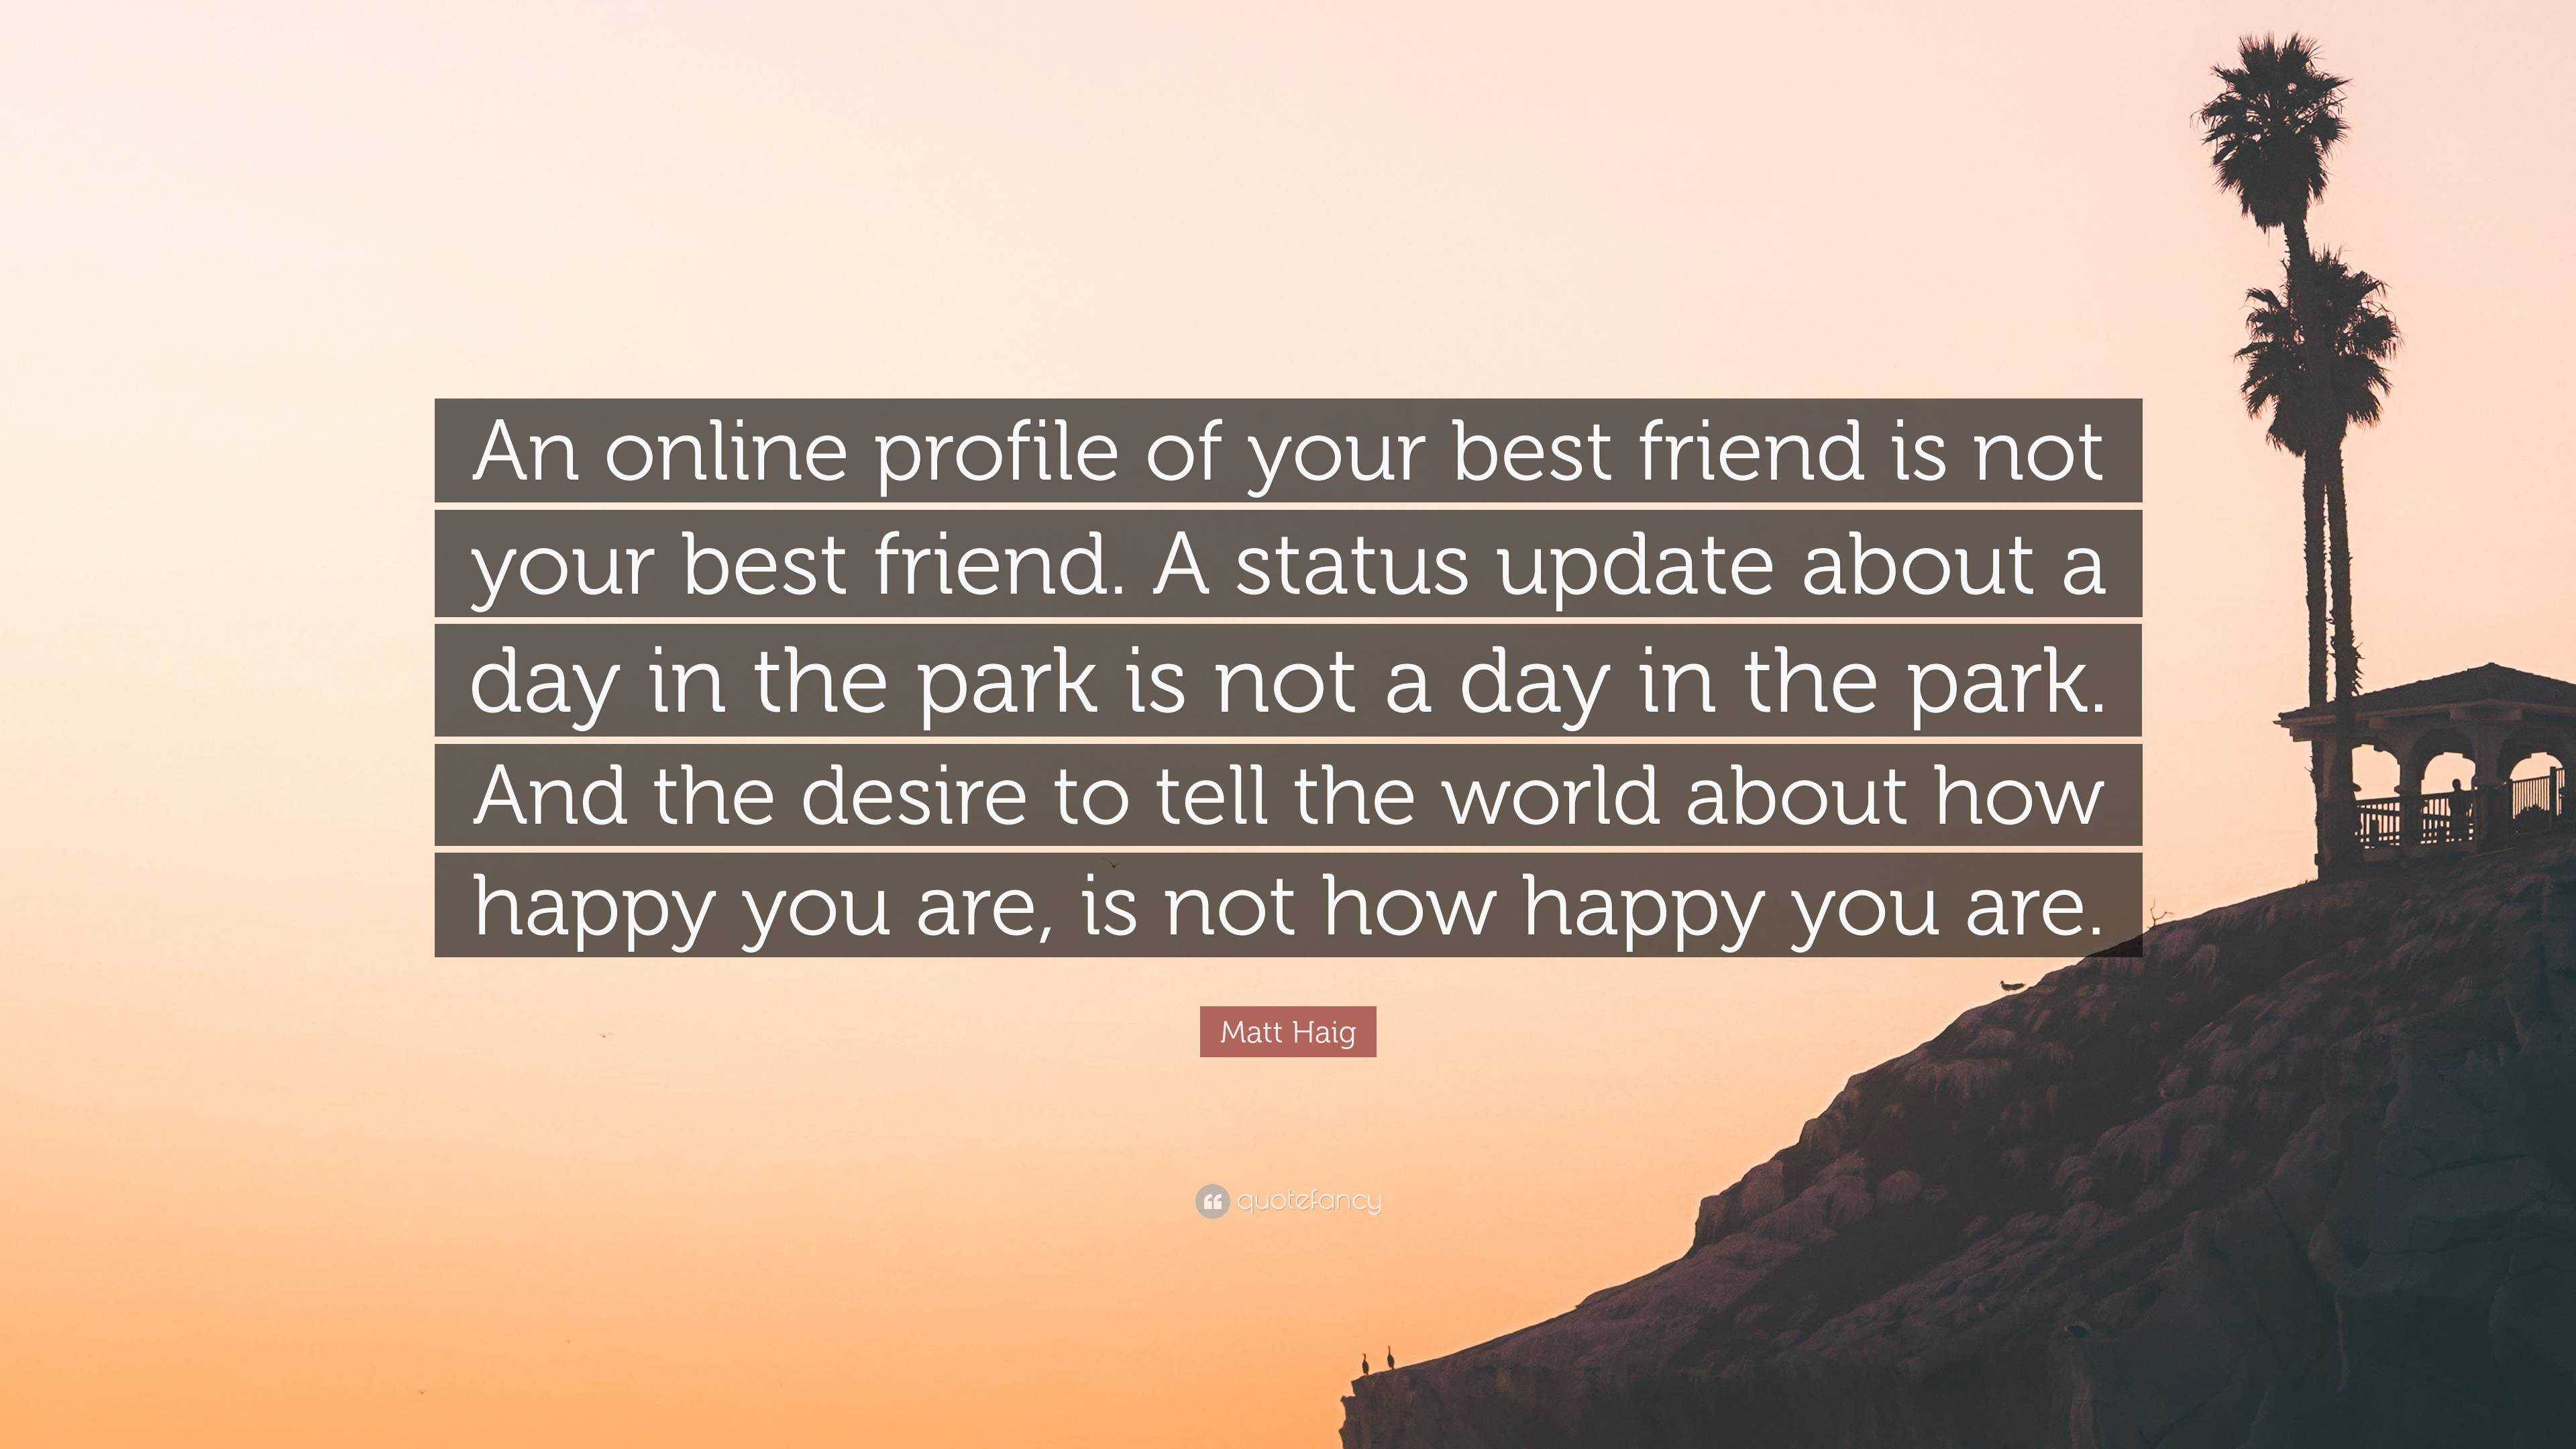 Matt Haig Quote: “An online profile of your best friend is not your best  friend. A status update about a day in the park is not a day in t”